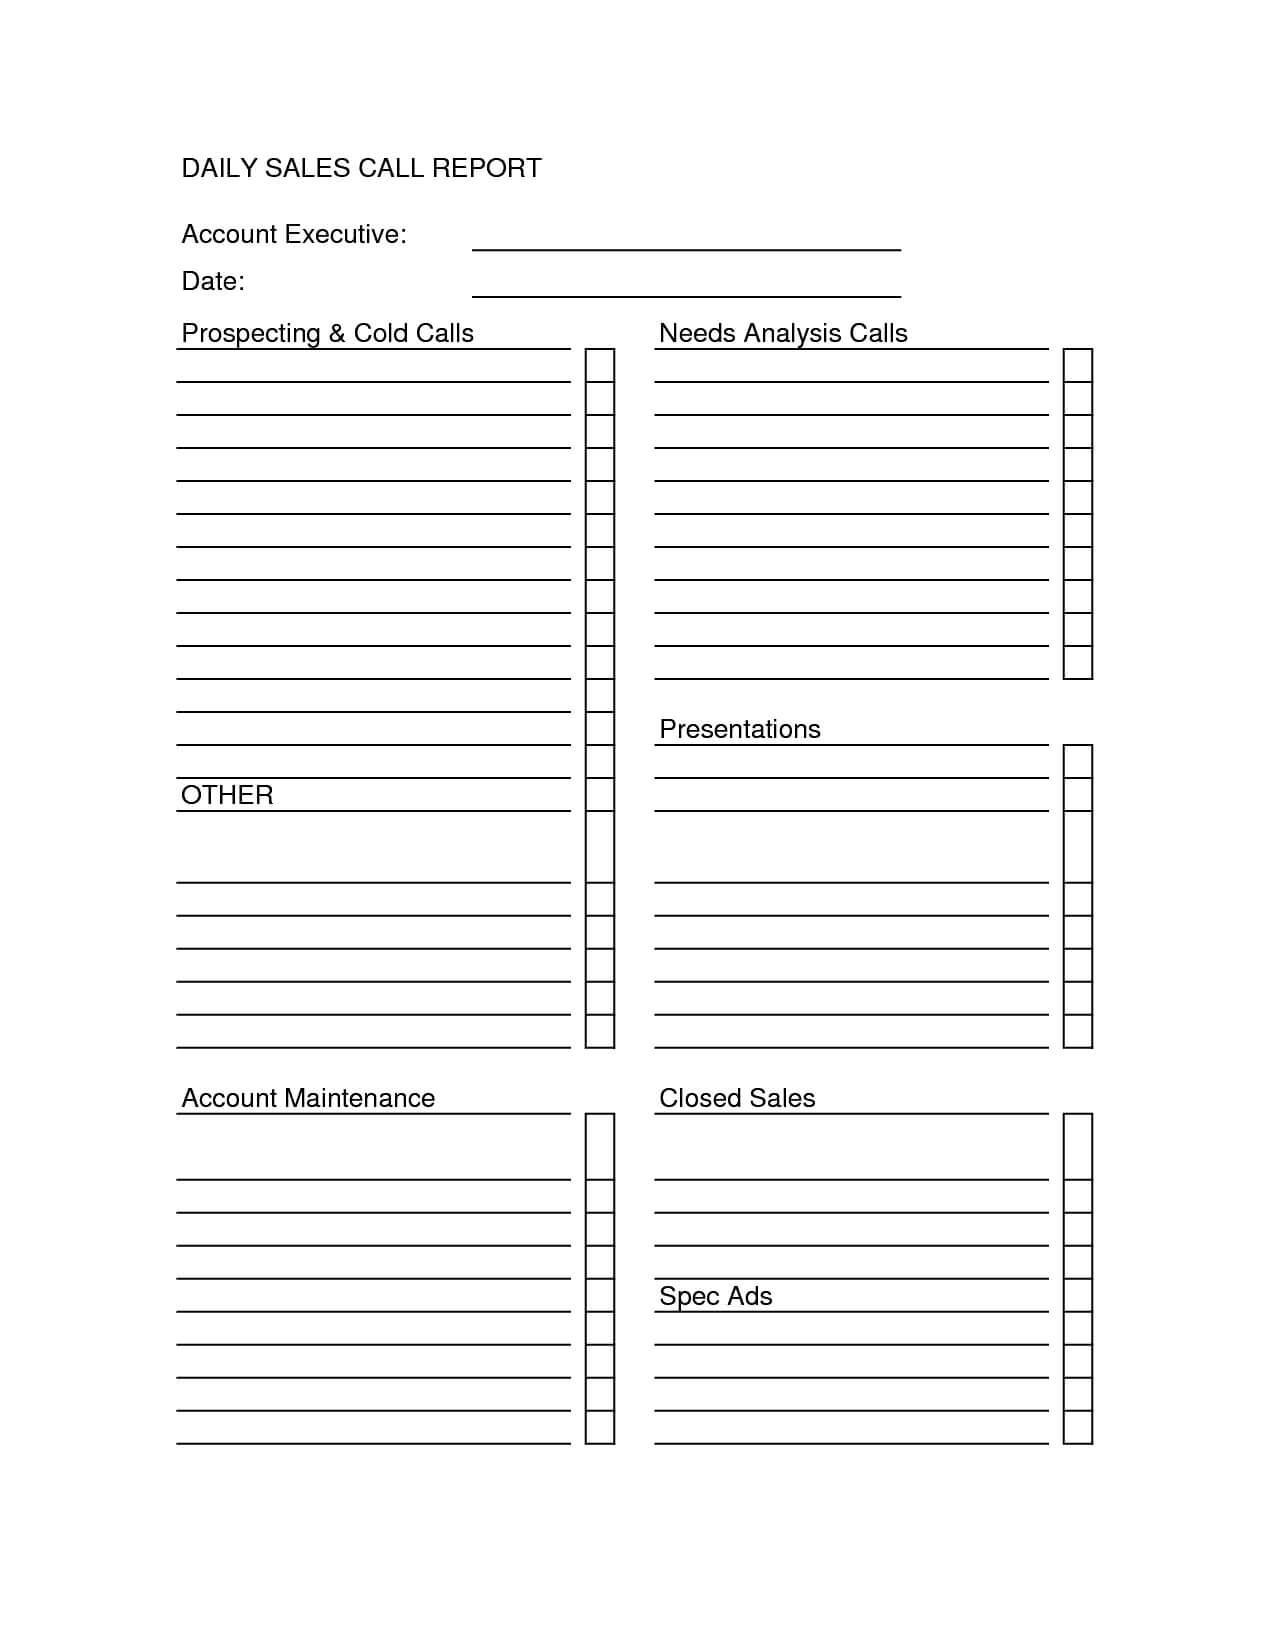 Sales Call Report Templates - Word Excel Fomats Pertaining To Sales Call Reports Templates Free